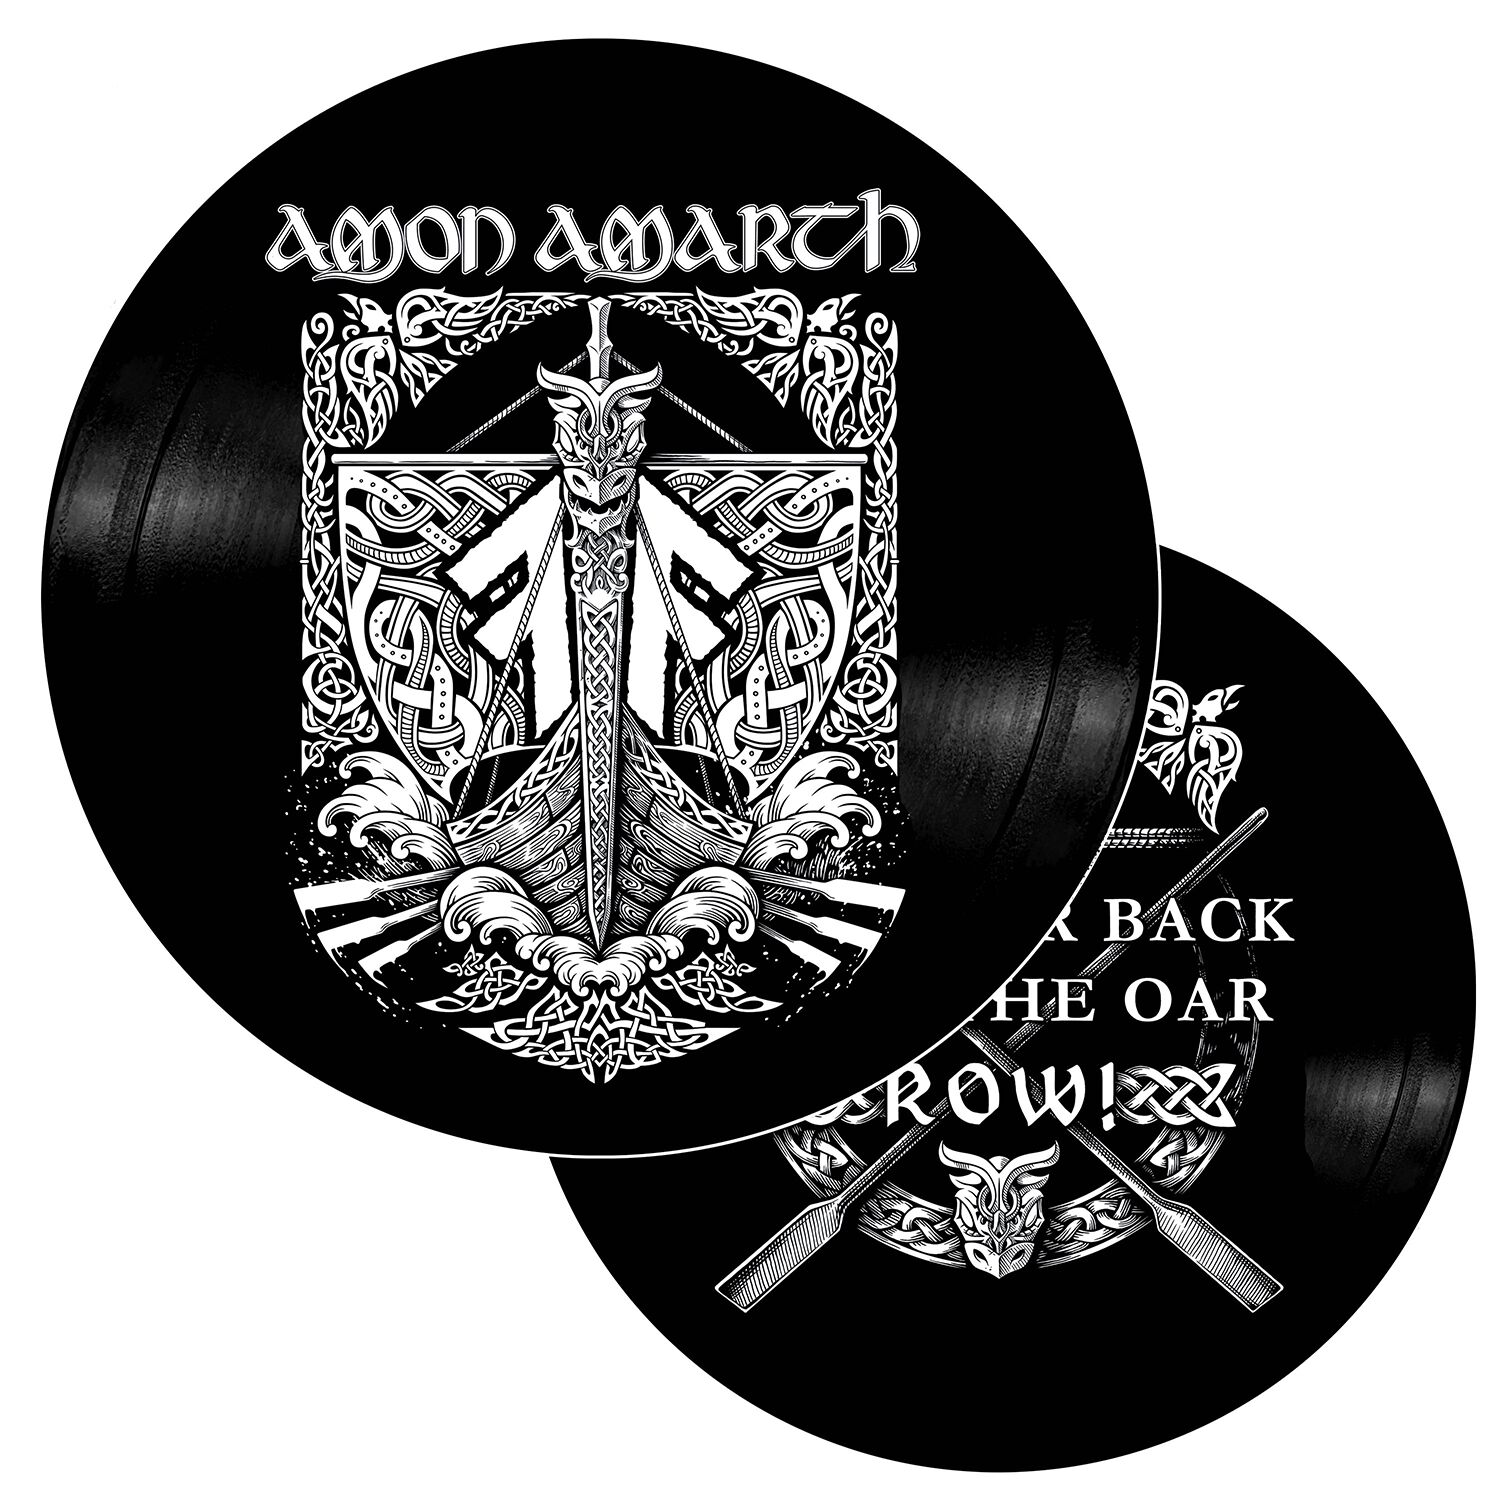 Image of Amon Amarth Put your back into the oar 12 inch-Single Picture